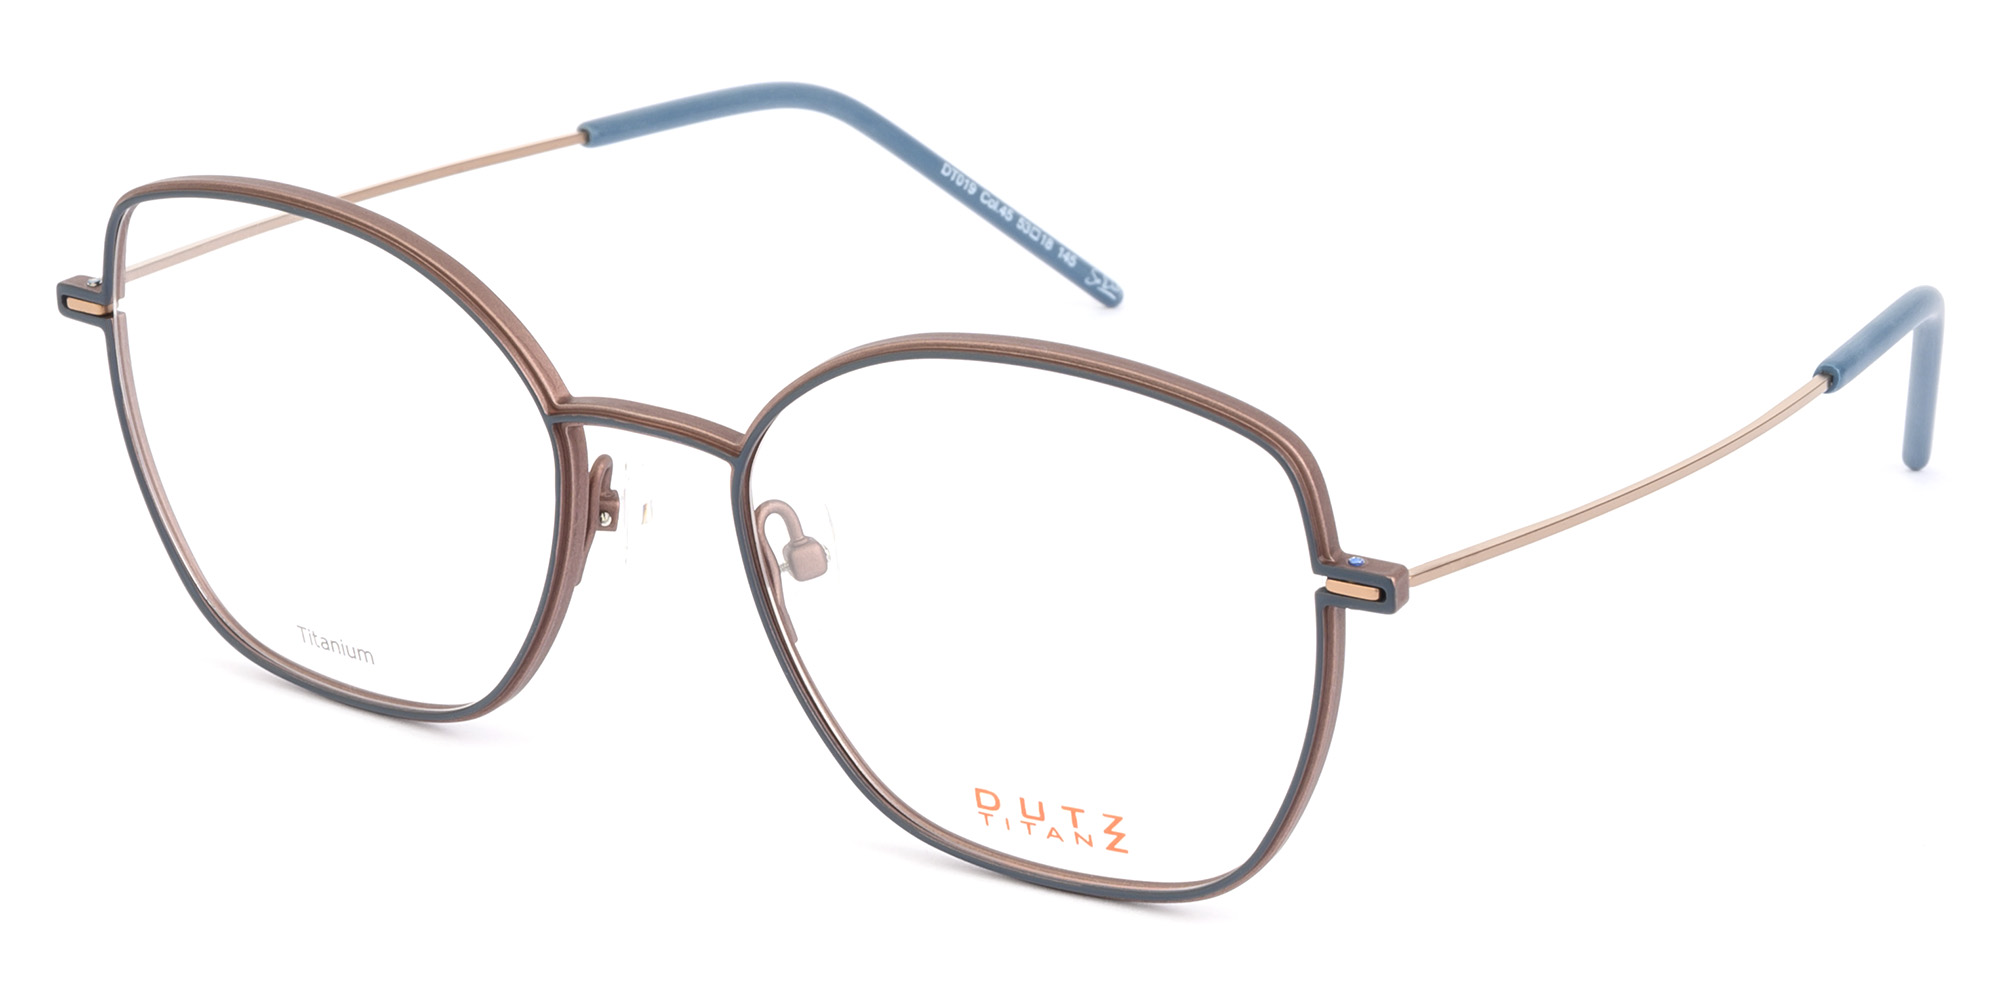 Lady's, bi-color, brown-blue, titanium optical frame, with gold toned temples and blue acetate temple tips